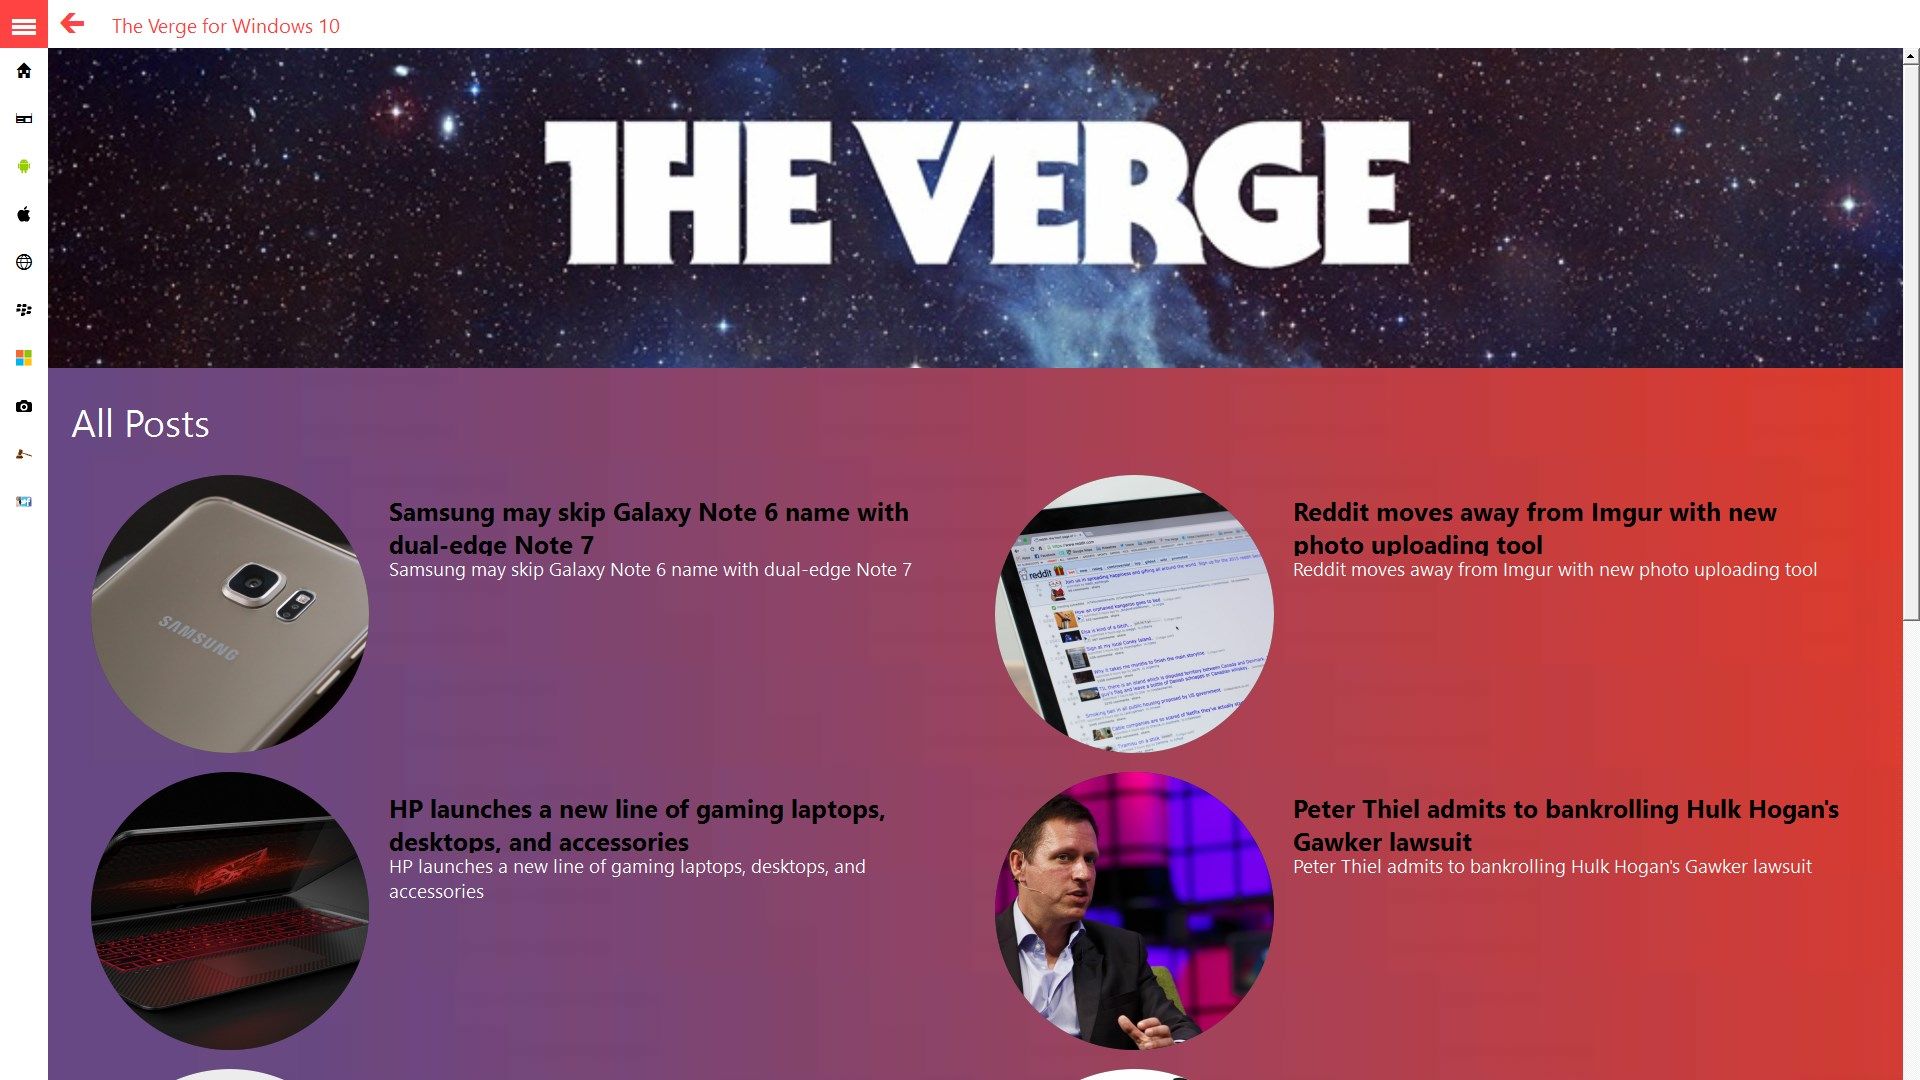 The Verge for Windows 10